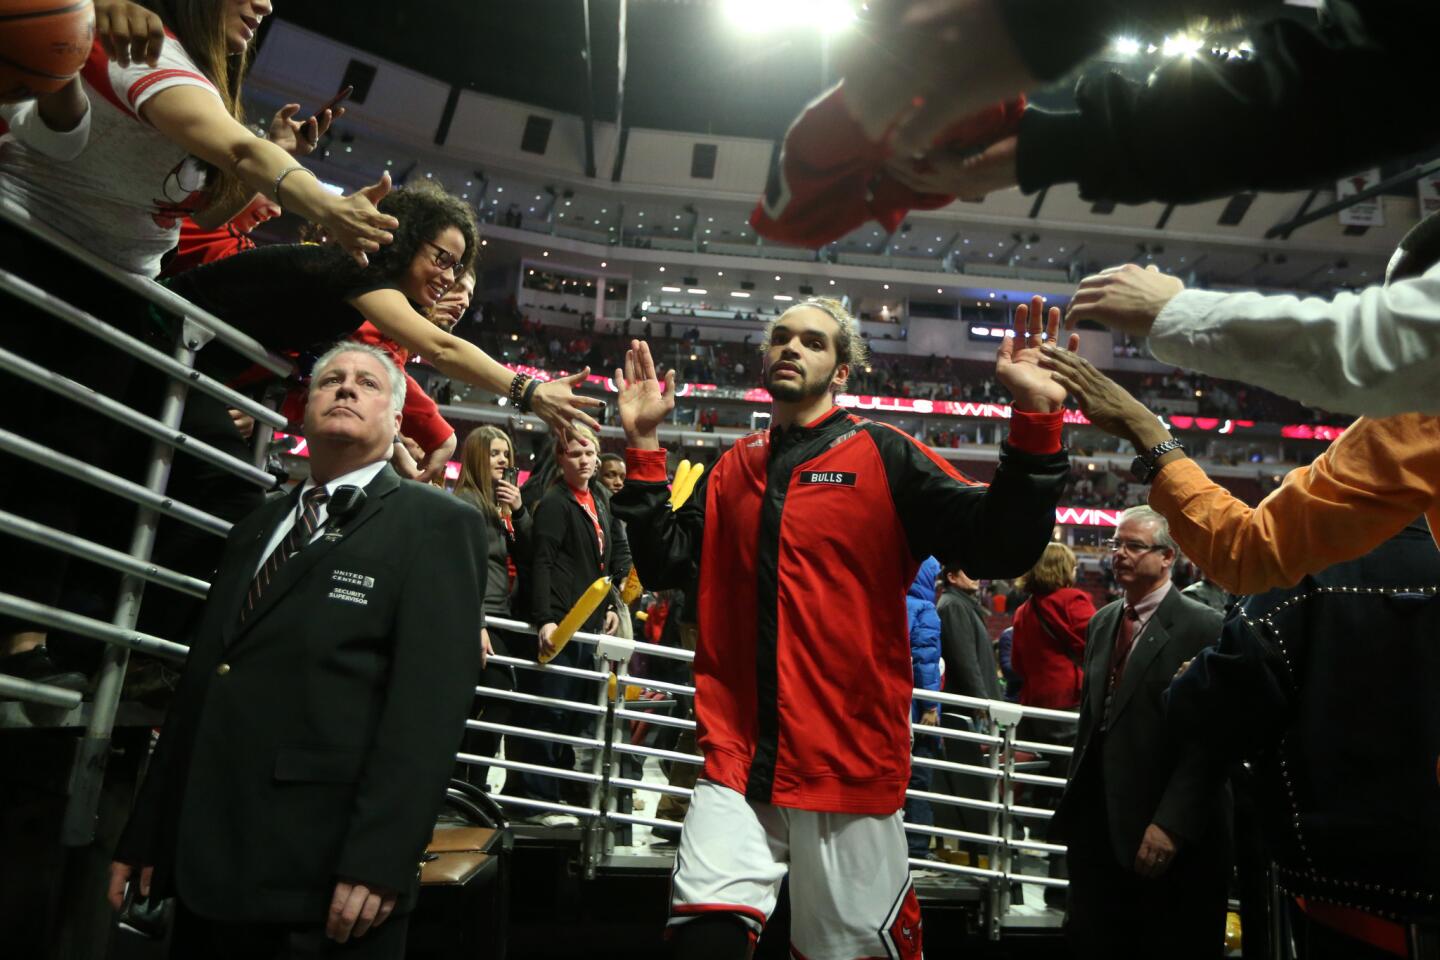 Joakim Noah is congratulated by fans as he heads for the locker room after beating the Rockets at the United Center.